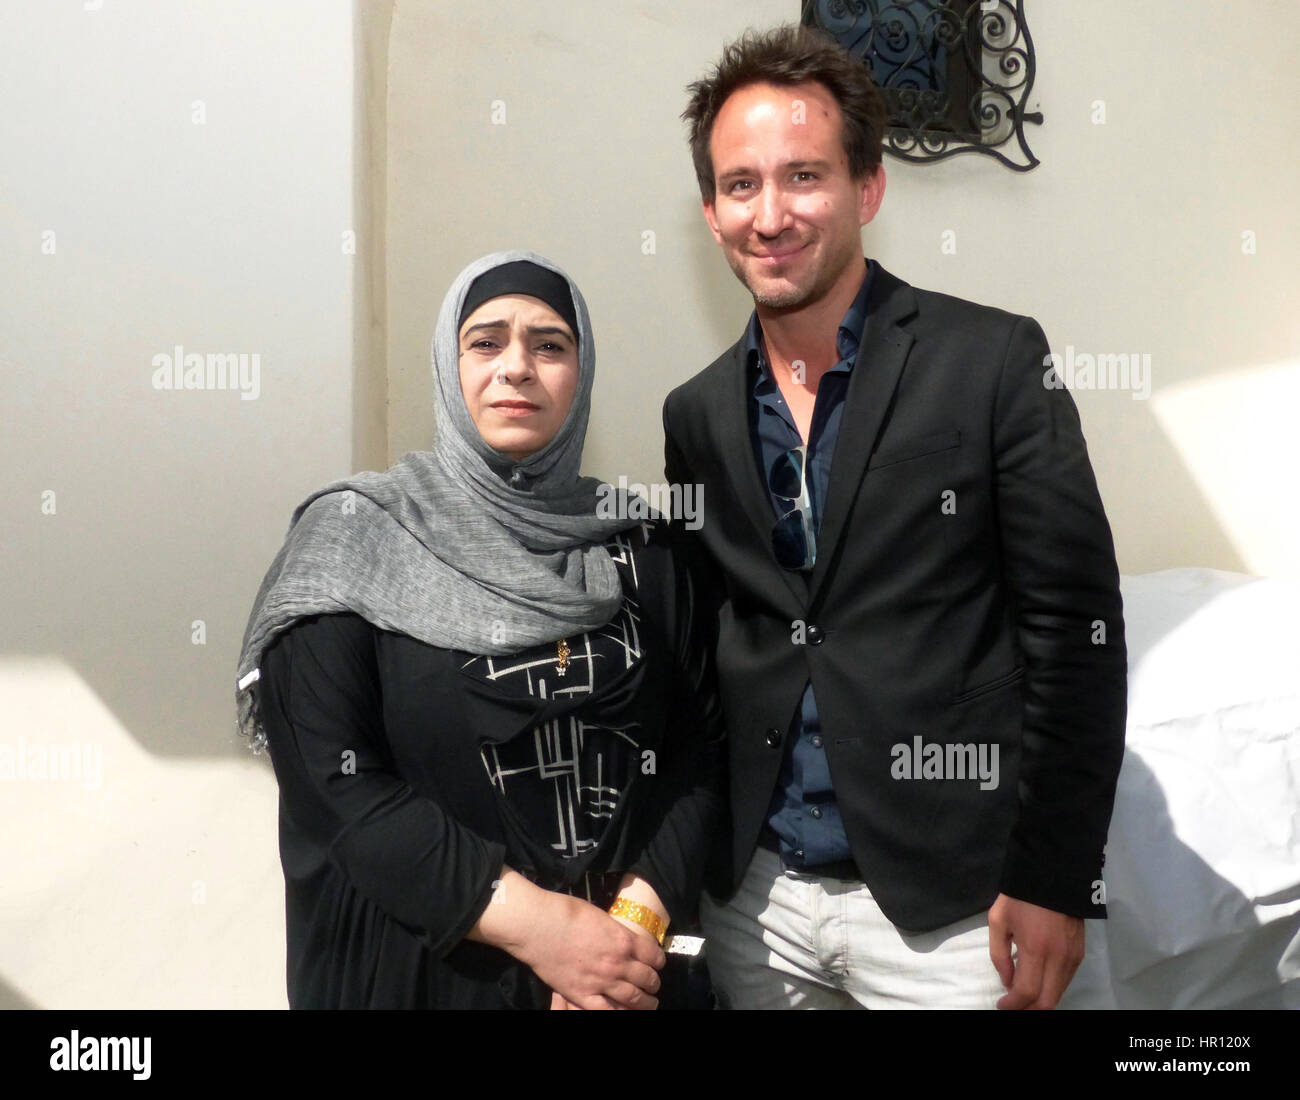 Los Angeles, US. 25th Feb, 2017. Documentary film maker Marcel Mettelsiefen and Hala Kamil from Syria, the central figure of his refugee documentary 'Watani: My Homeland, photographed during the traditional reception for the German Oscar nominees at the historical Villa Aurora in Los Angeles, US, 25 February 2017. The Academy Award ceremony takes place on 26 February 2017. Photo: Barbara Munker/dpa/Alamy Live News Stock Photo